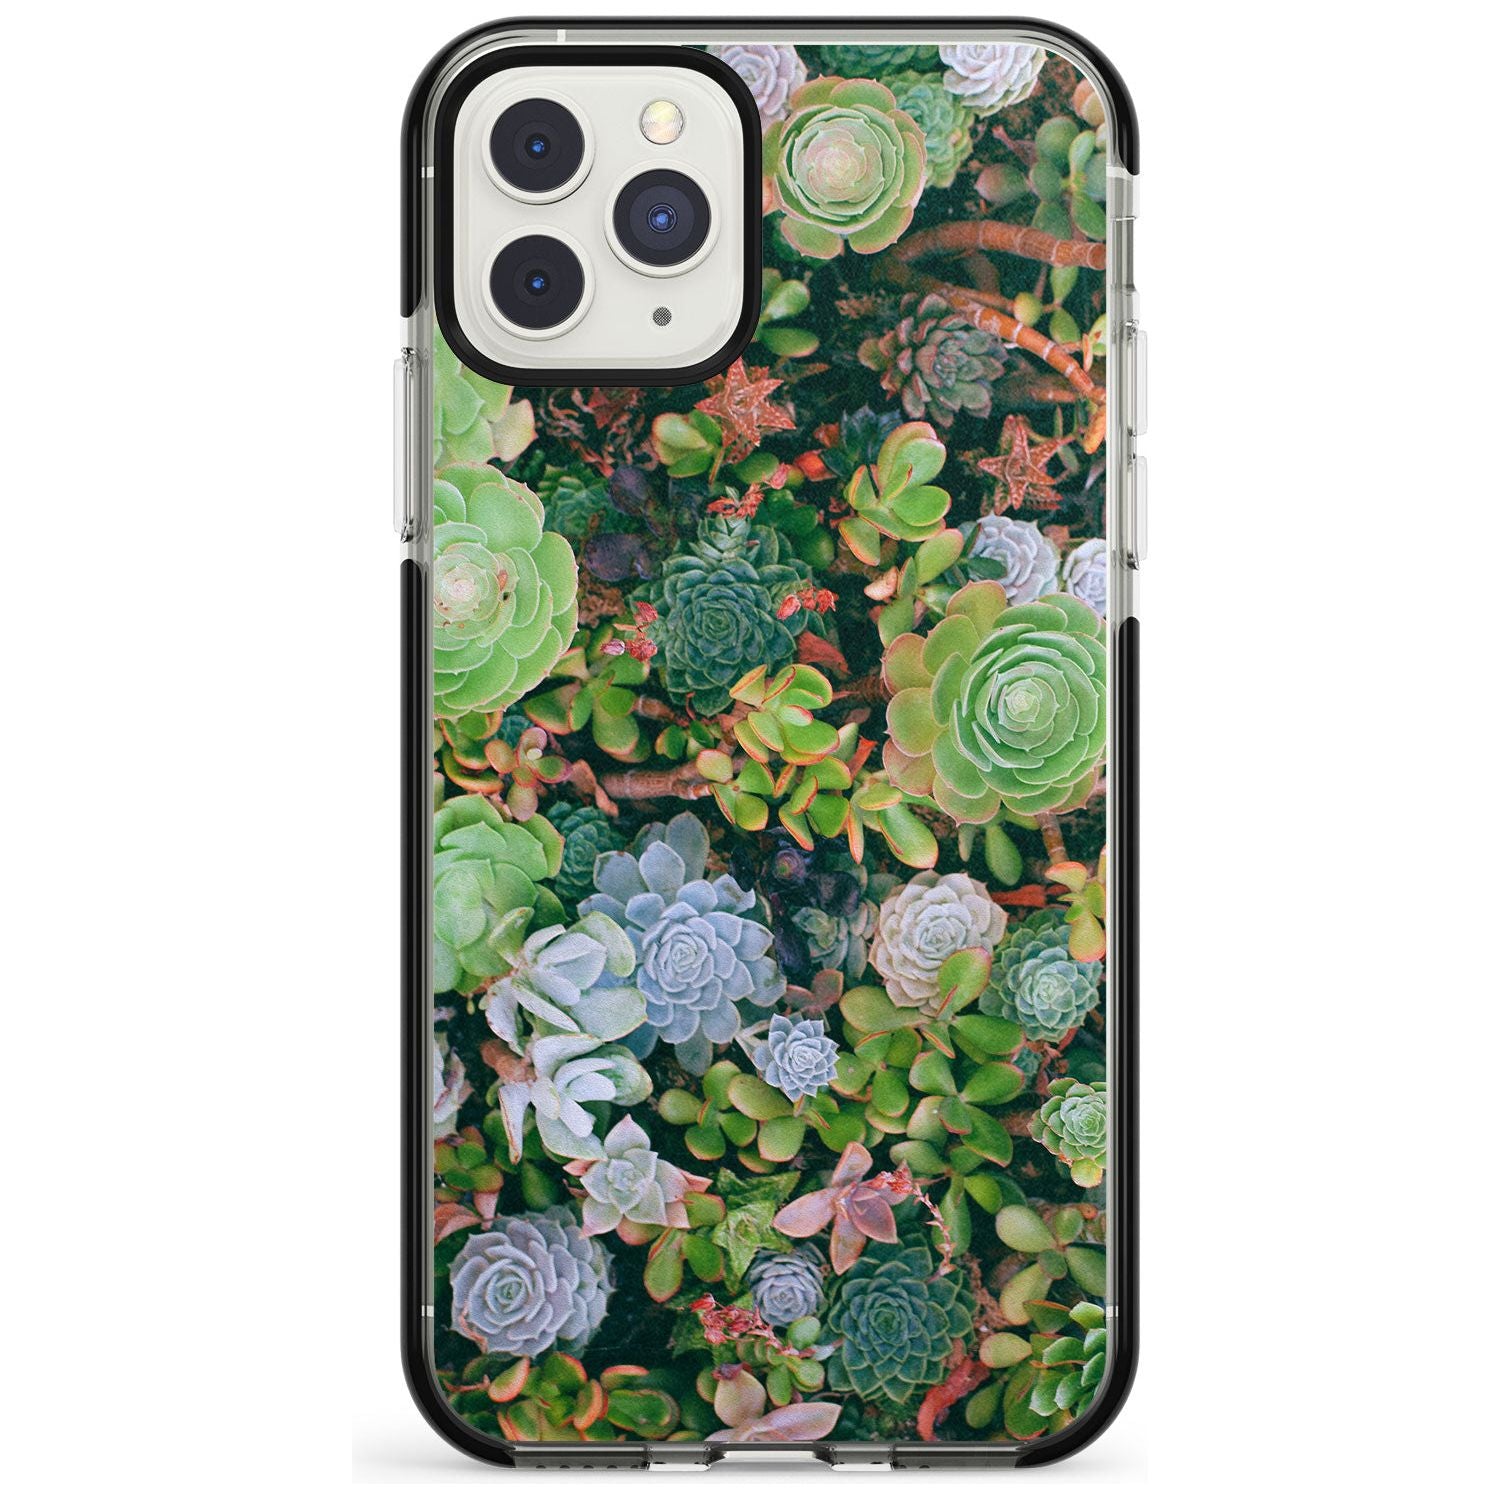 Colourful Succulents Photograph Black Impact Phone Case for iPhone 11 Pro Max